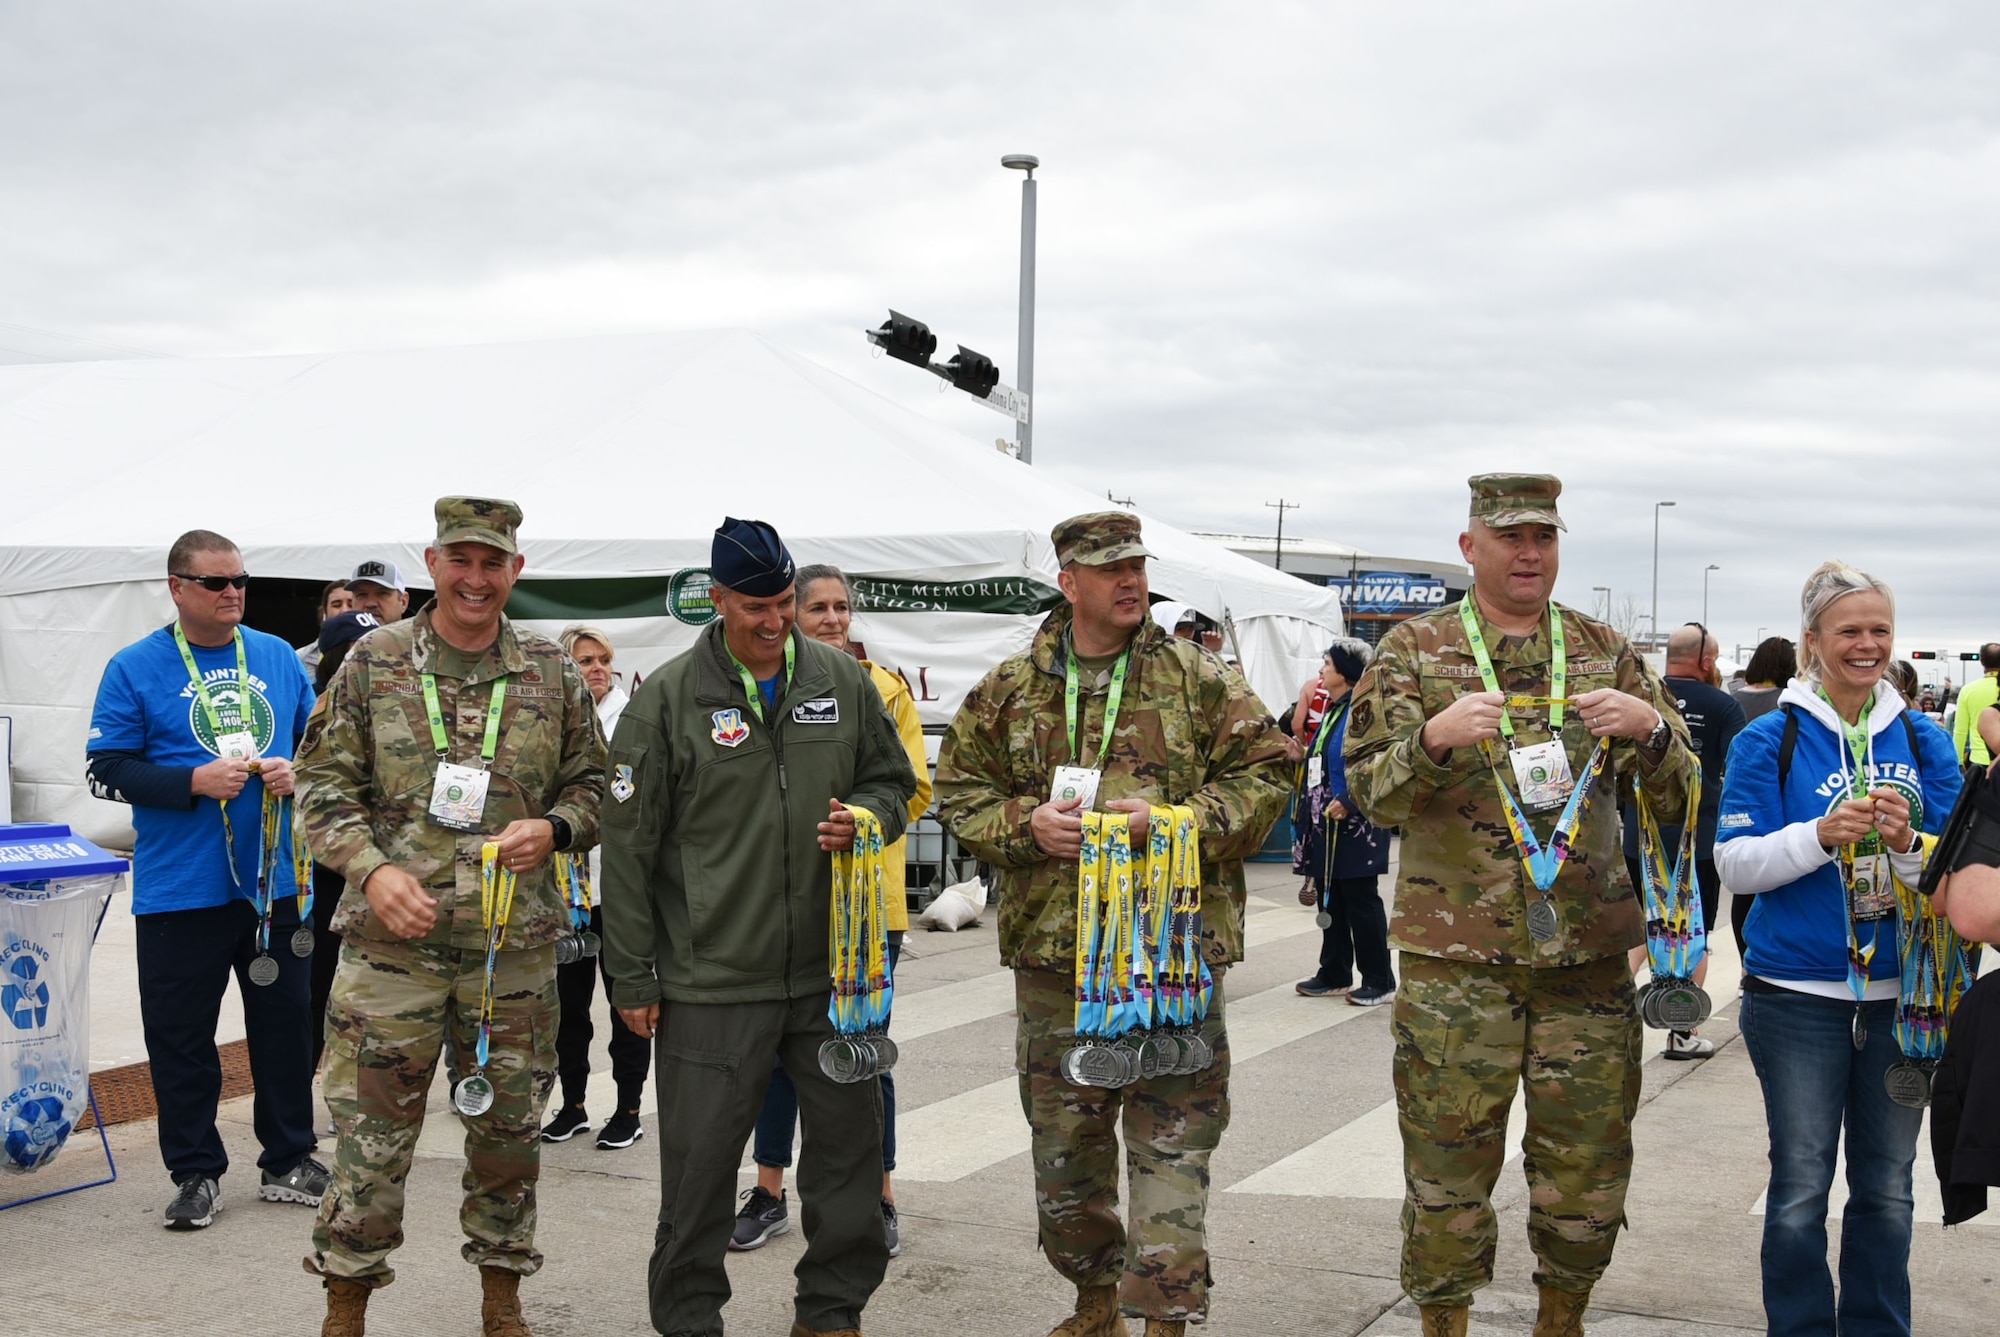 Tinker Air Force Base senior leaders handed out medals to runners at the finish line of the Oklahoma City Memorial Marathon April 24, 2022.